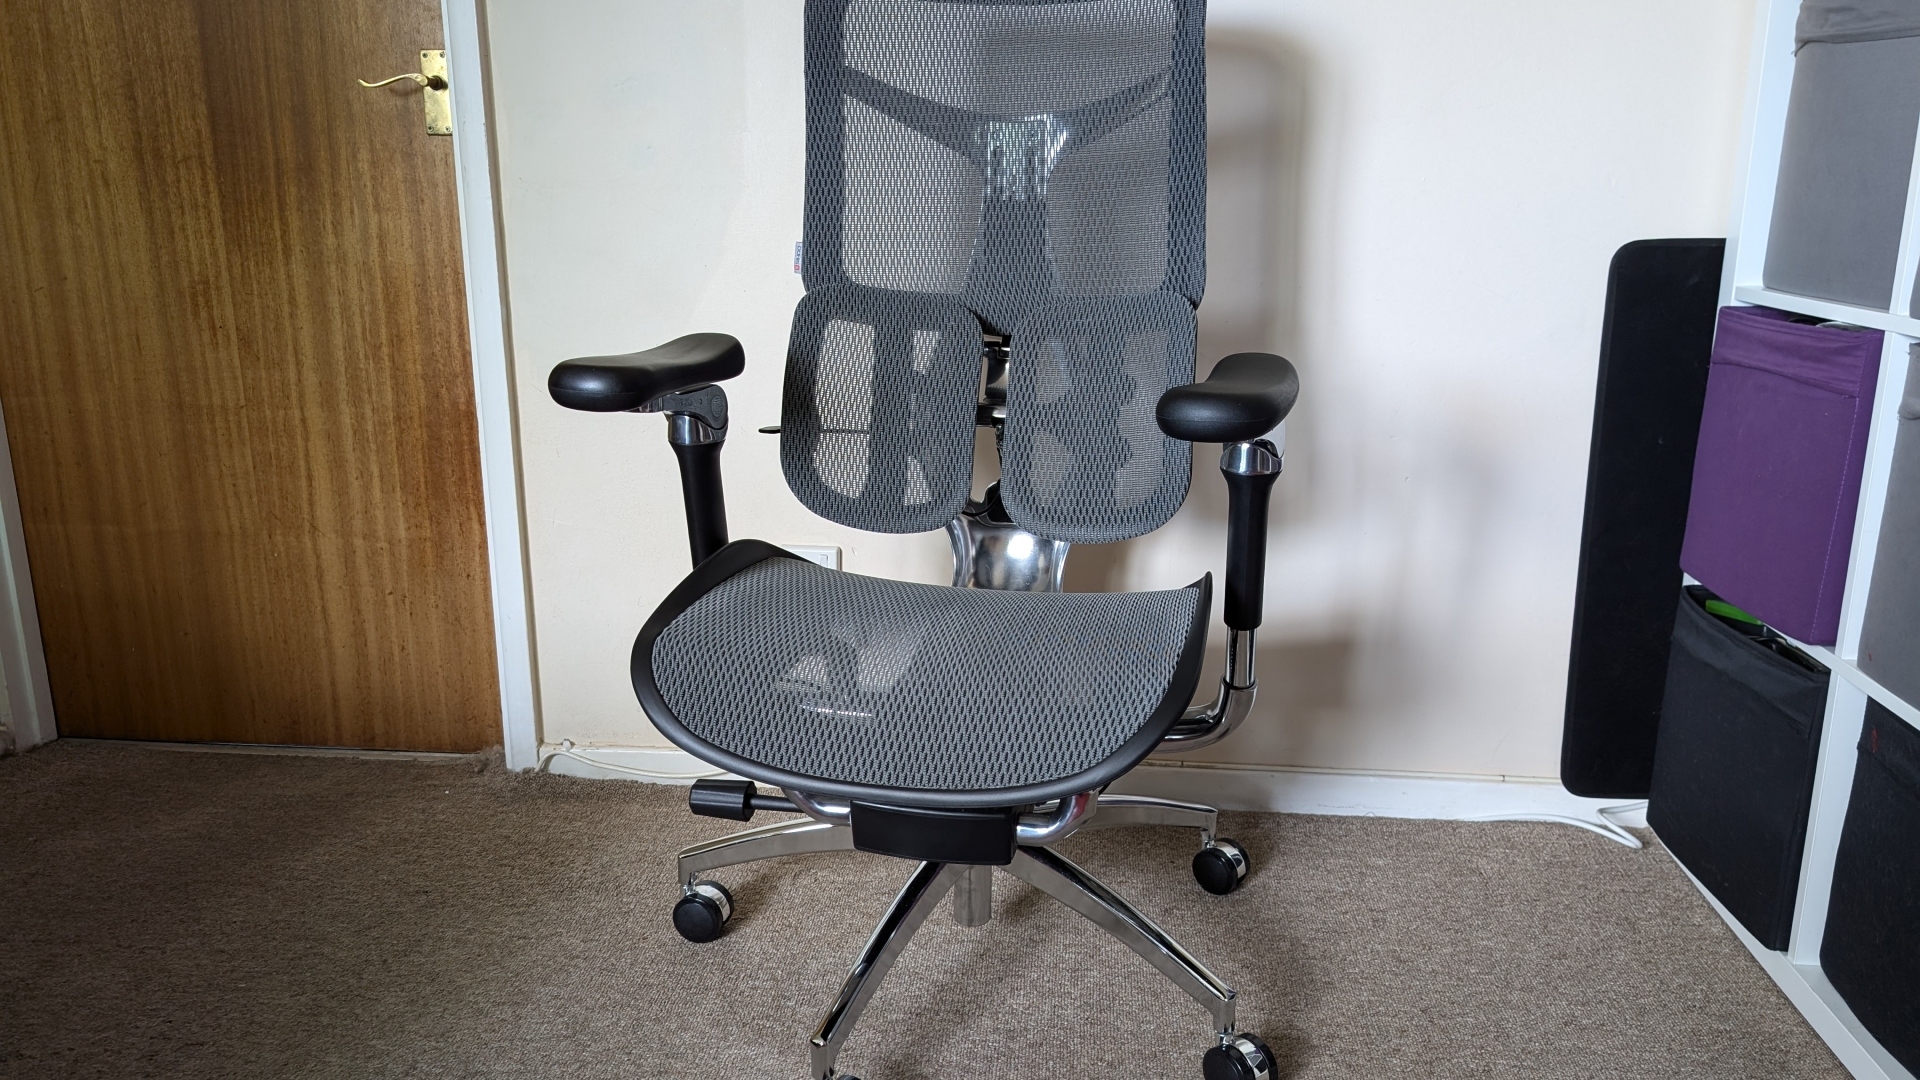 Sihoo Doro S300 ergonomic office chair review image showing the chair from the front, with the arms in the centre of the frame.